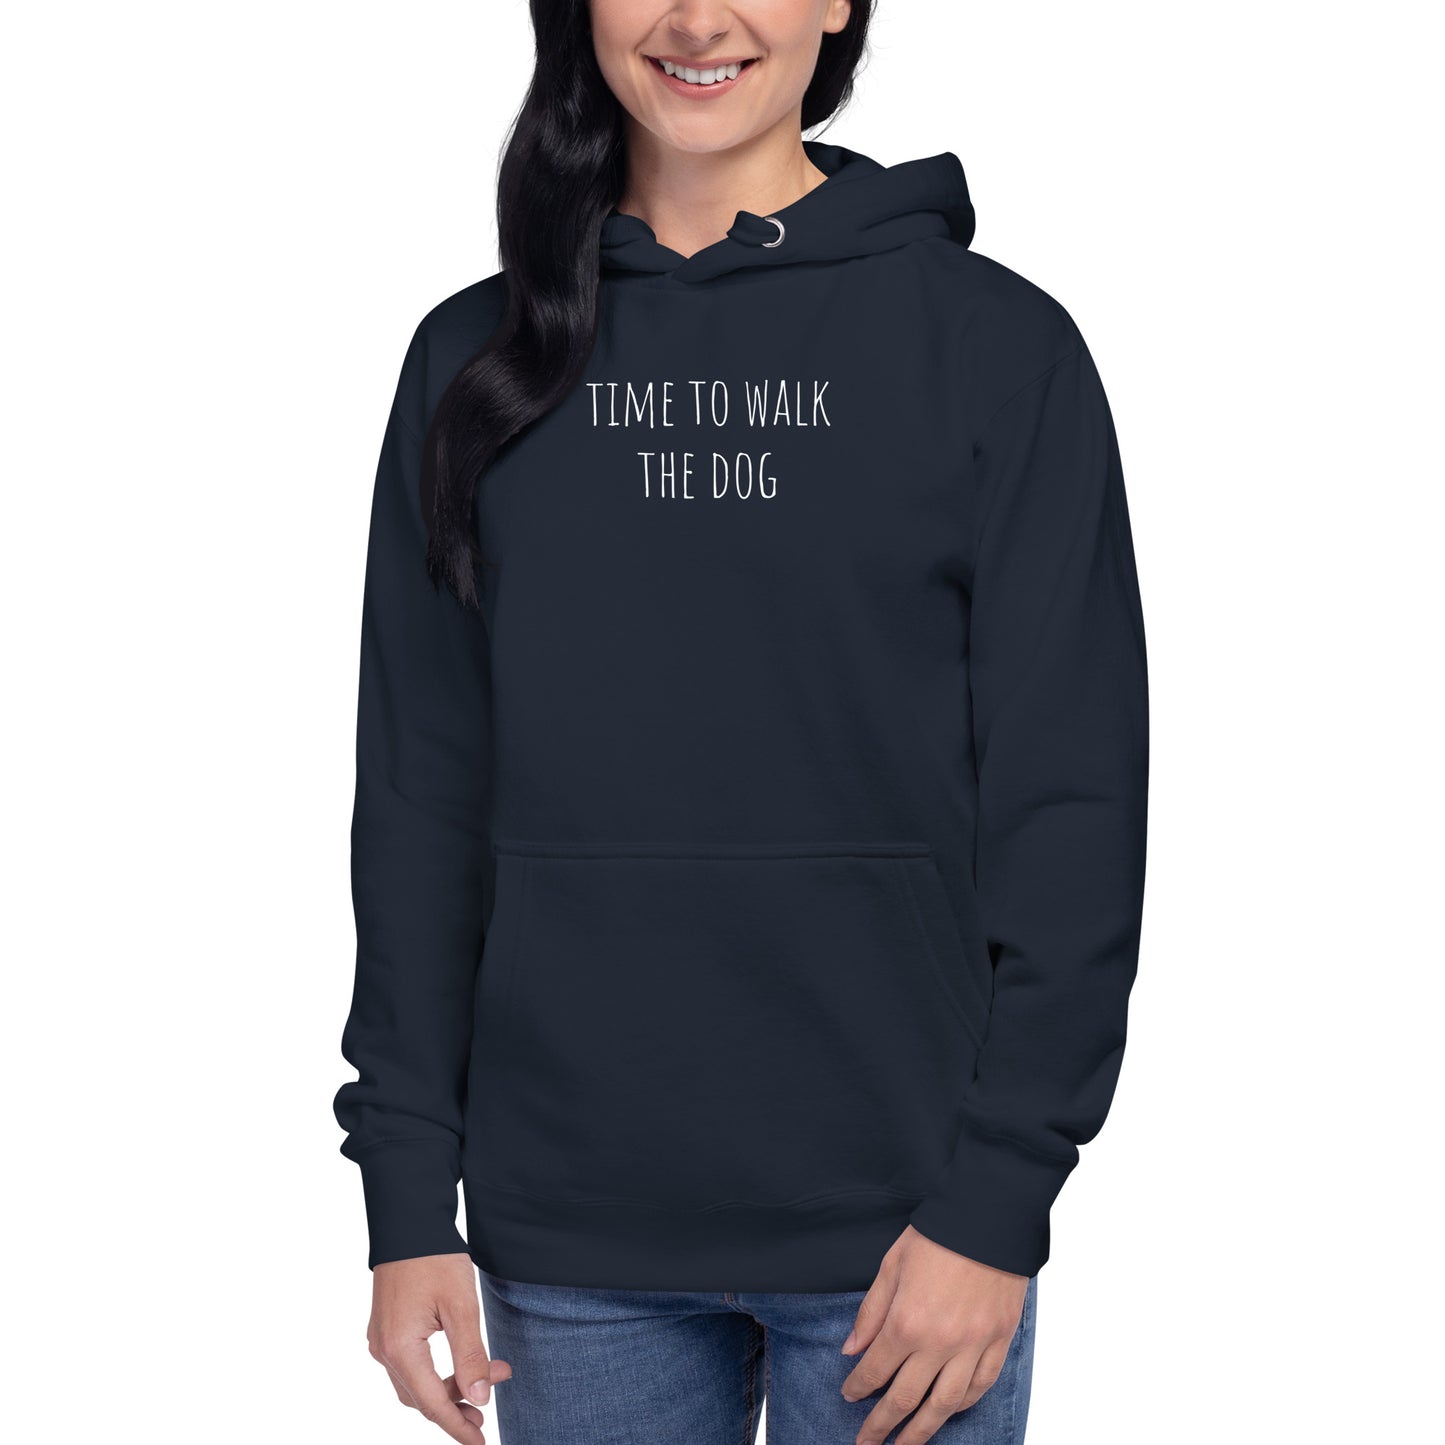 Time to walk the dog German Shepherd lover hoodie navy blue color - GSD Colony